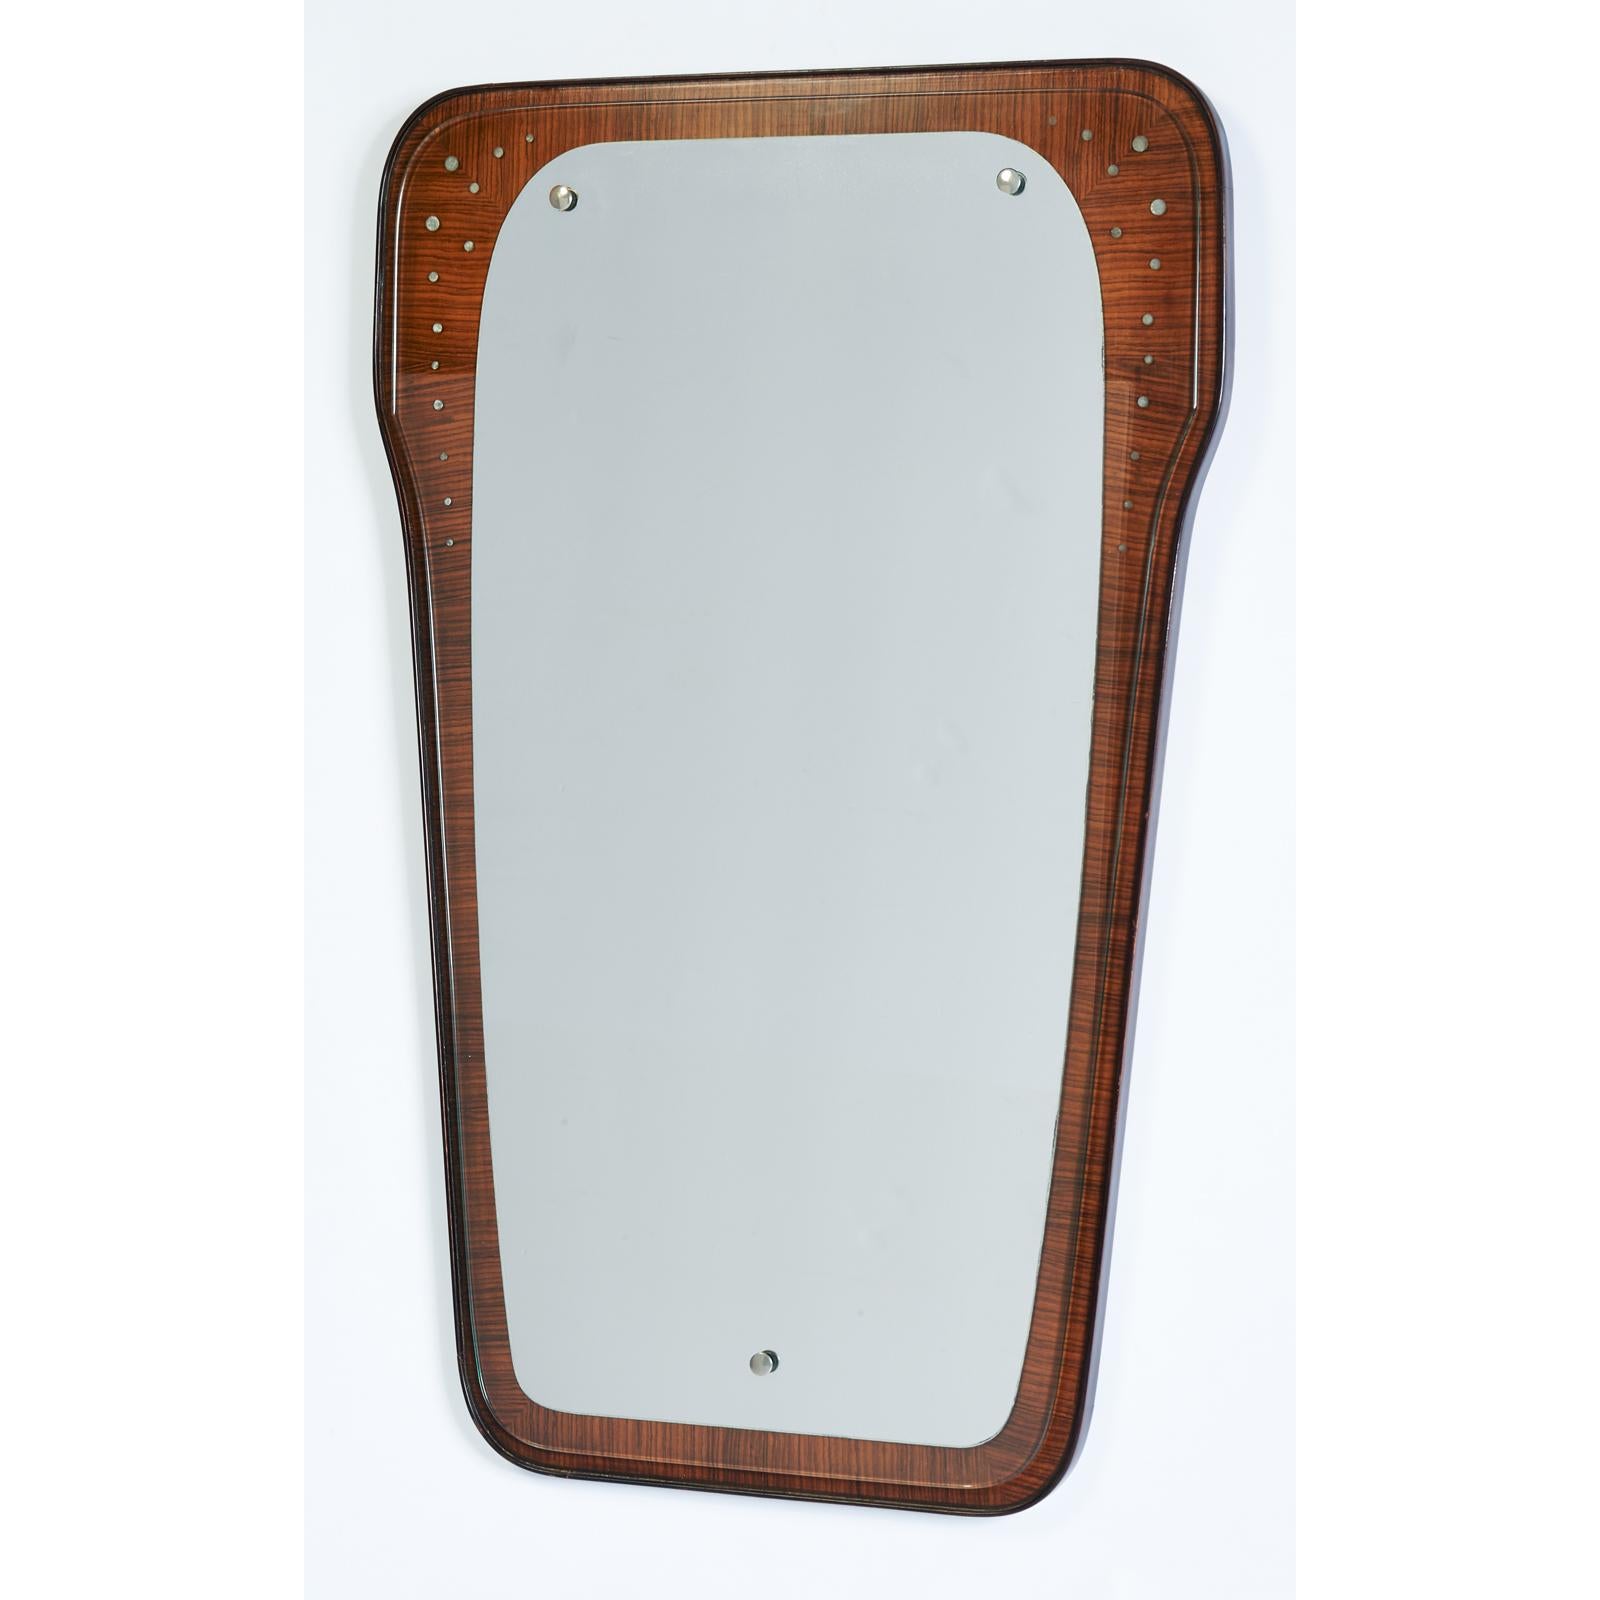 Italy, 1950s
Liberty style shaped mirror, beautifully grained wood frame with contrasting frame, partially mirrored glass with bubble decor, nickeled mounts
Dimensions: 35 H x 23 W.
 